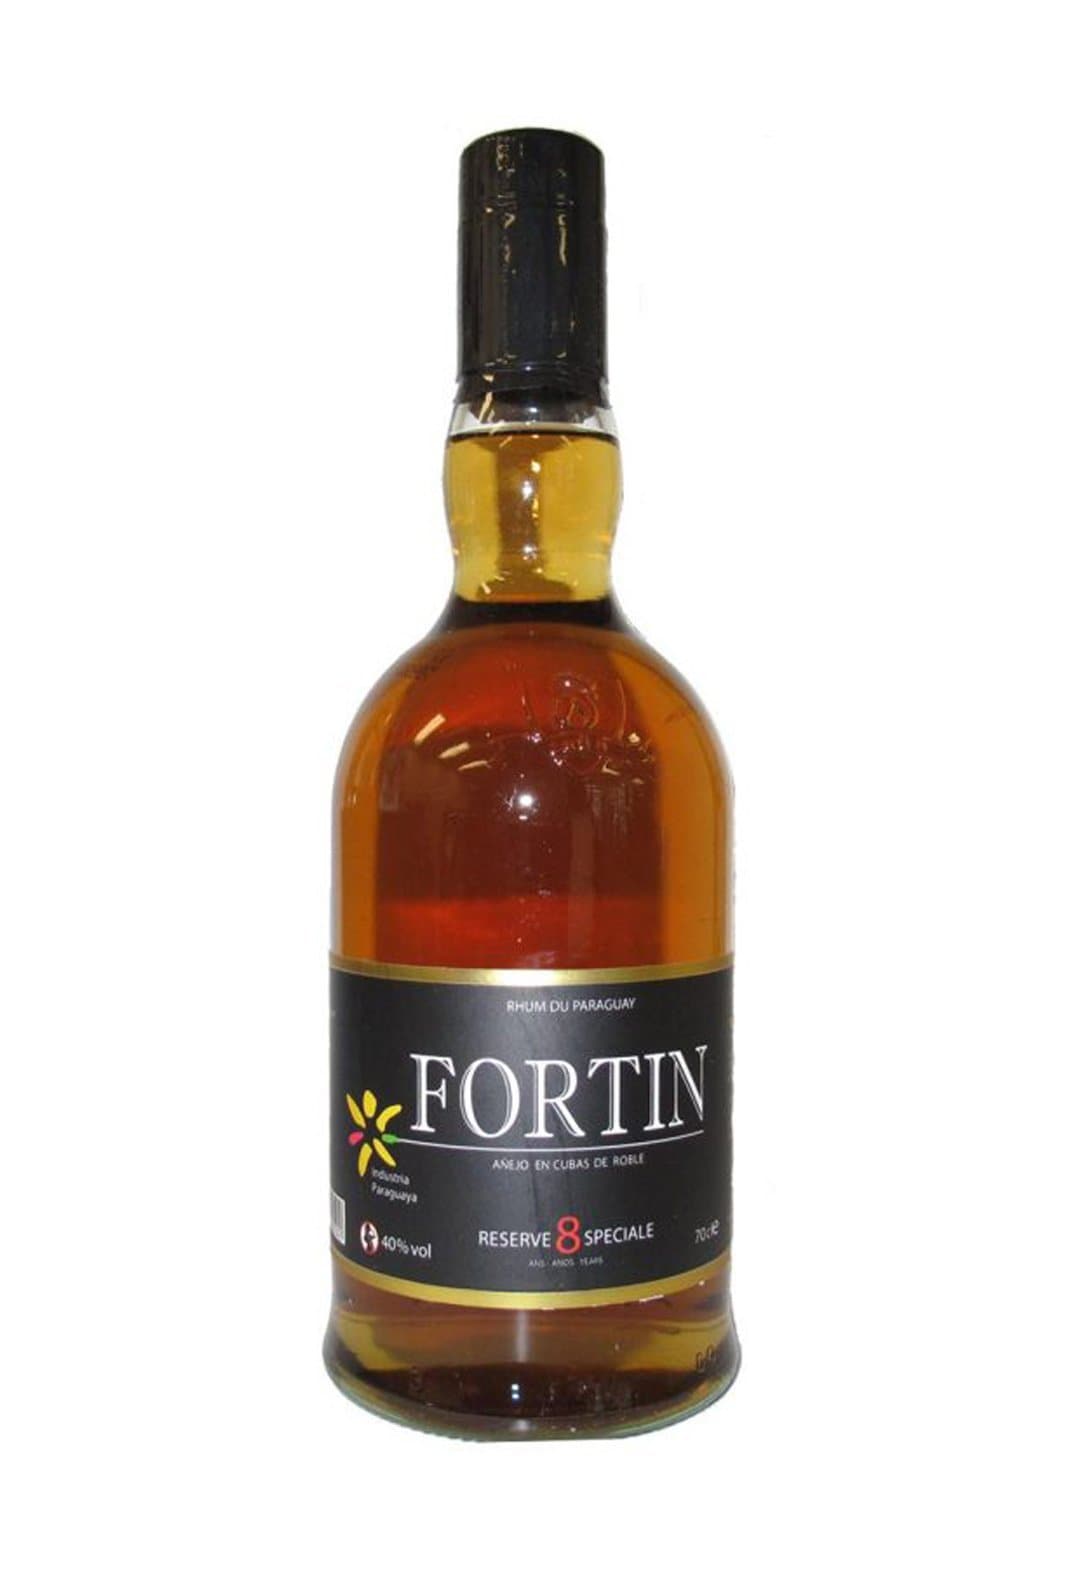 Fortin Rum 8 years Paraguay 40% 700ml | Rum | Shop online at Spirits of France